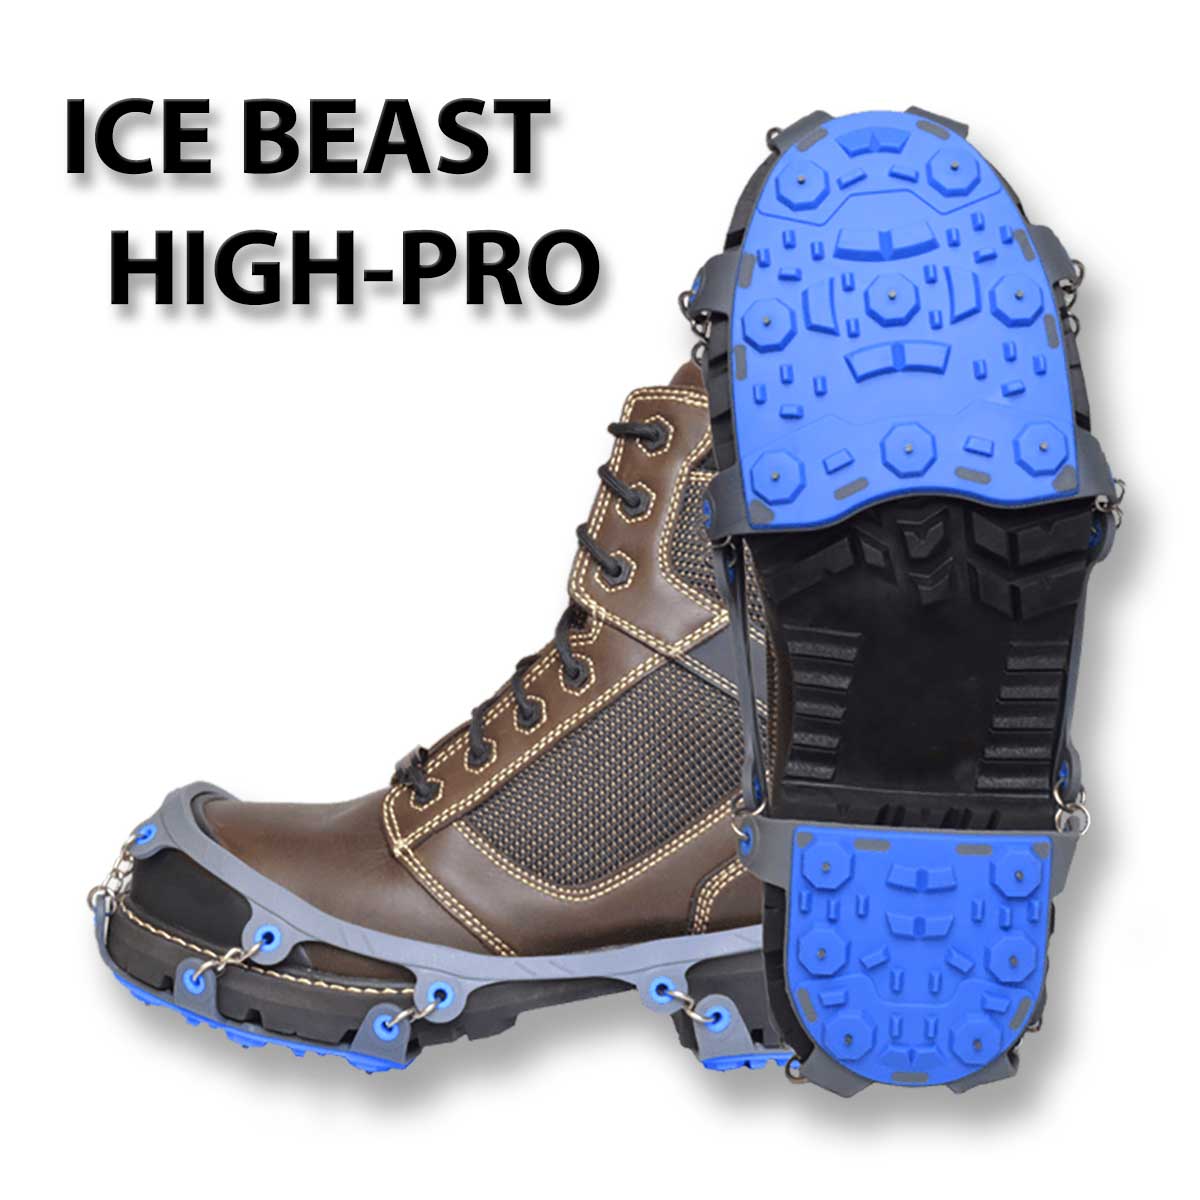 Winter Walking ICE BEAST HIGH-PRO Ice Cleats for Boots